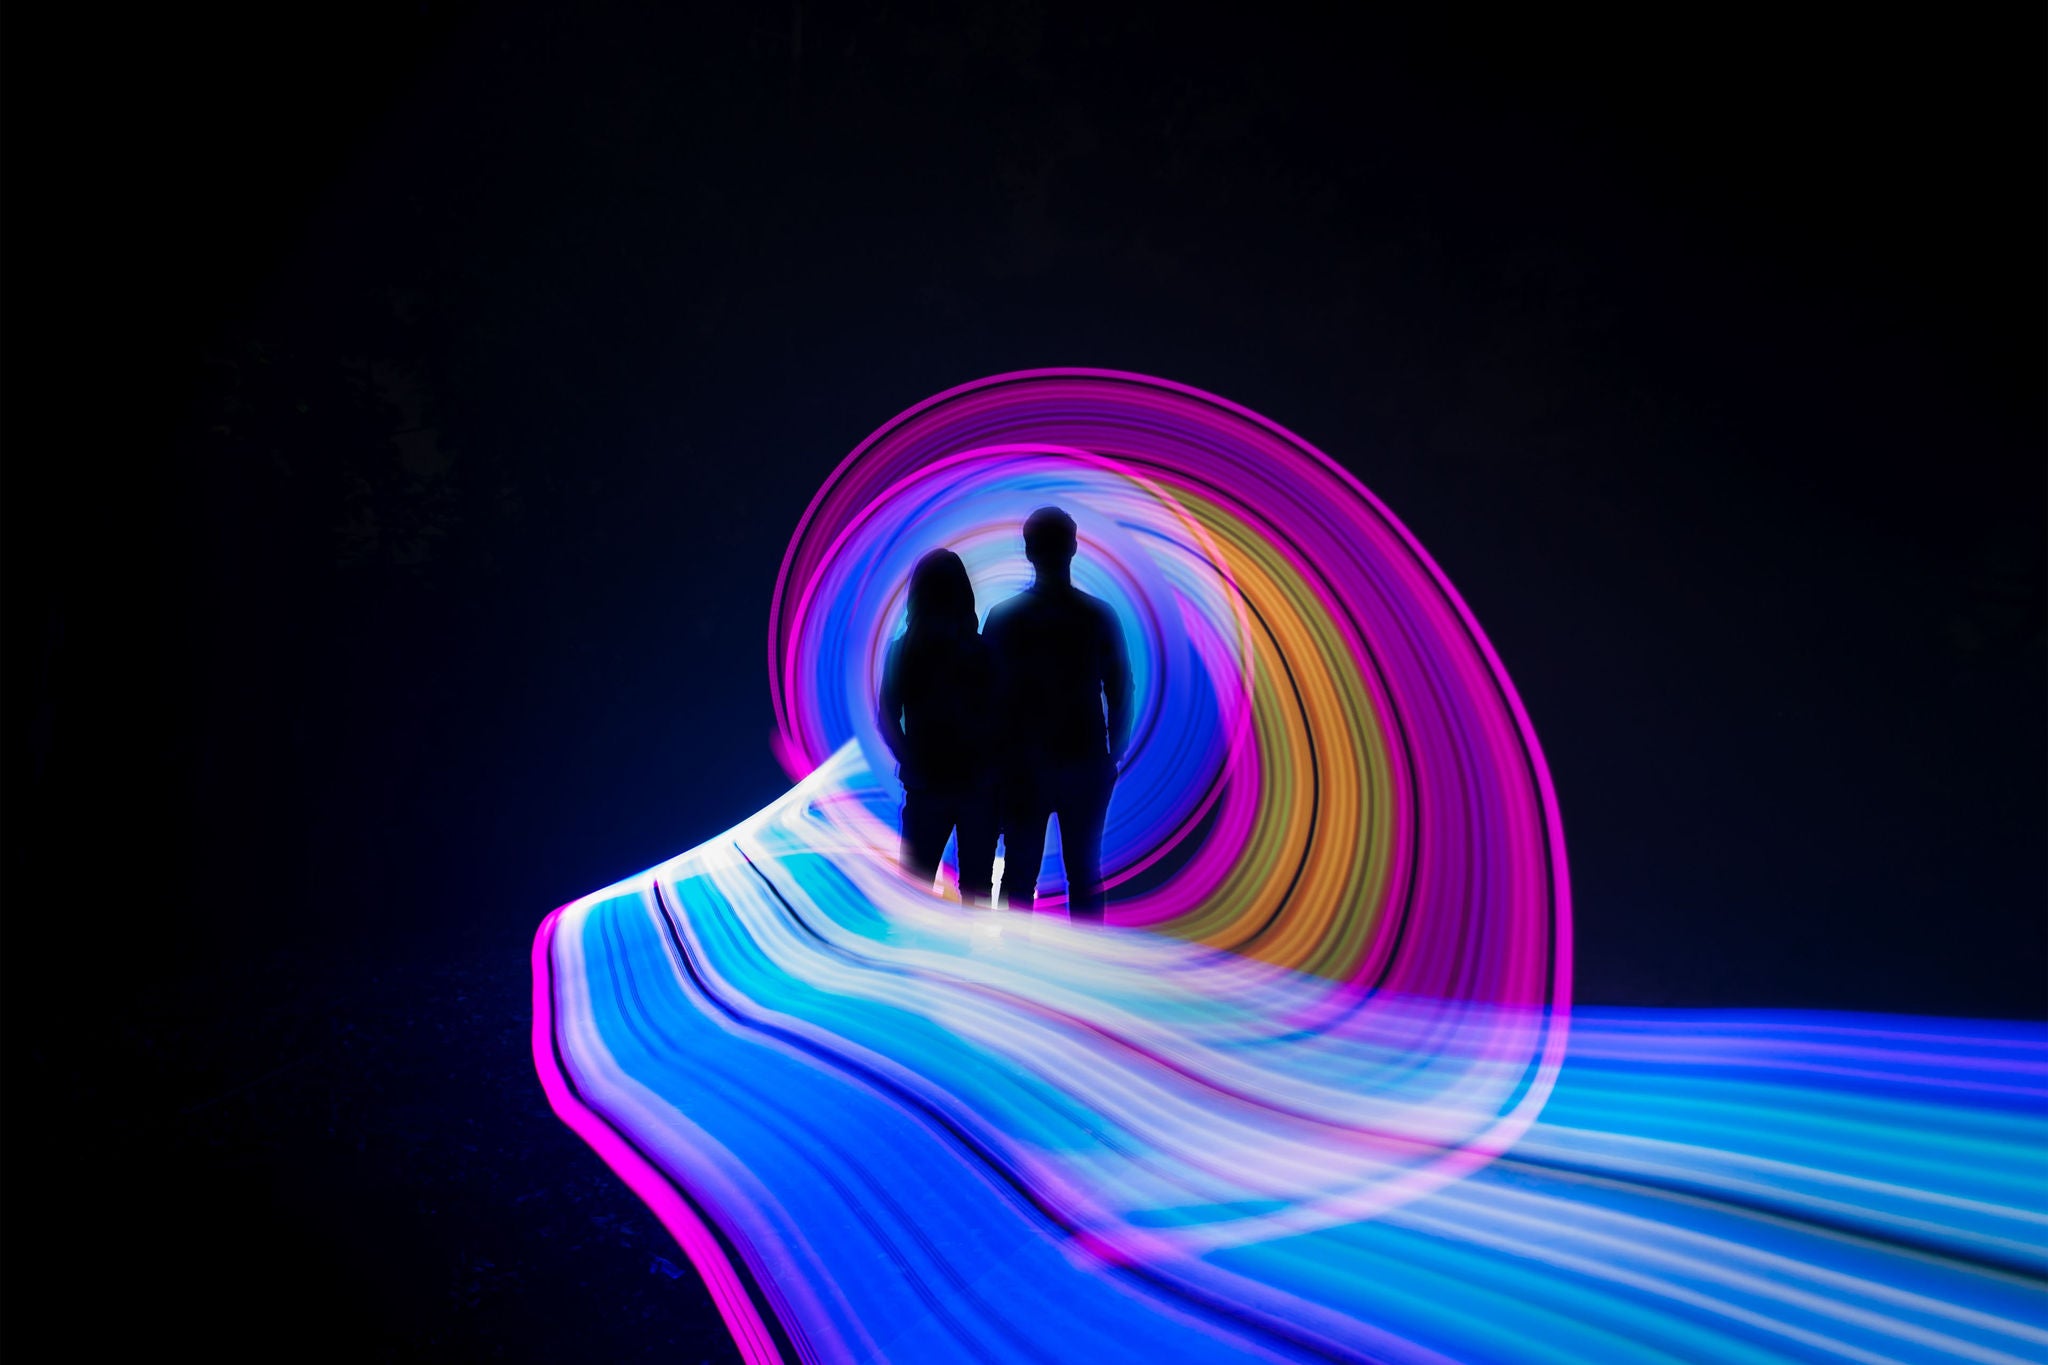 Two people standing in the center of a light painting.